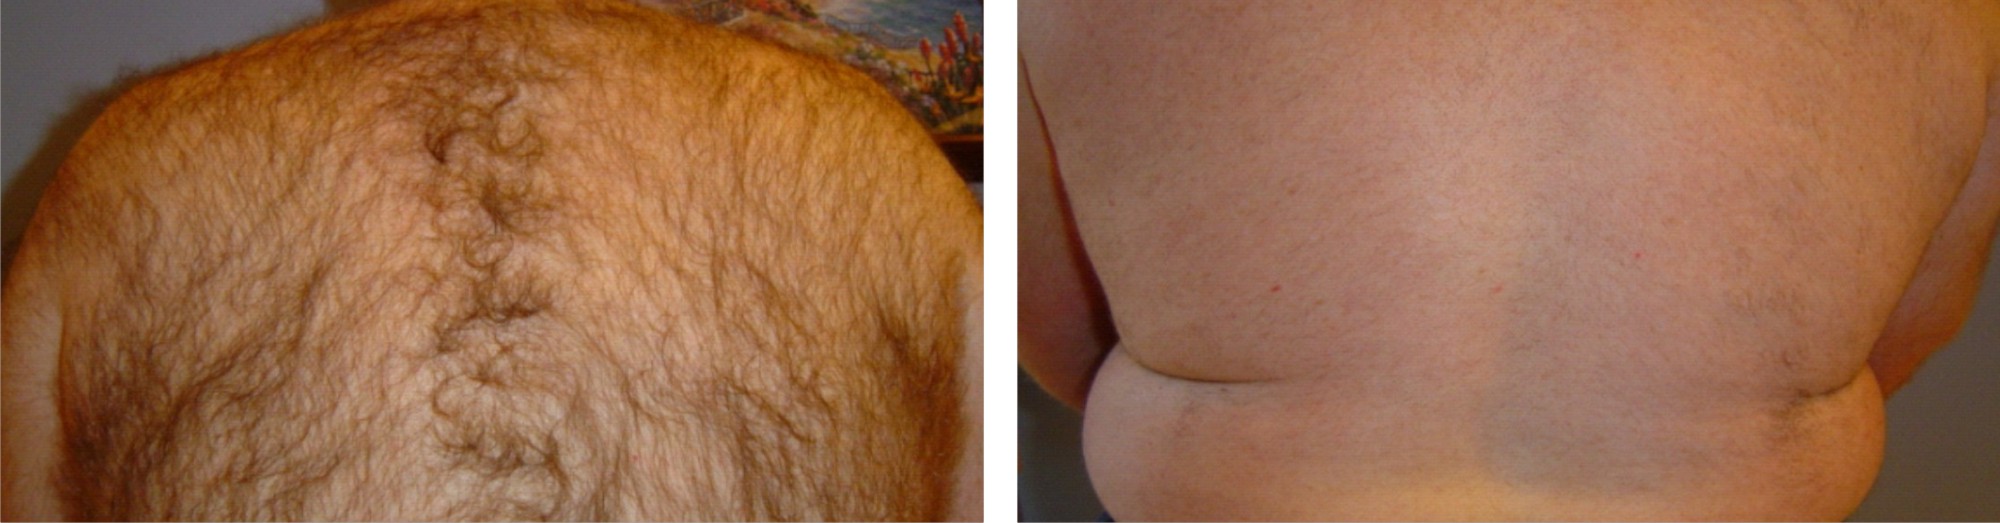 IPL Hair Removal Image Two